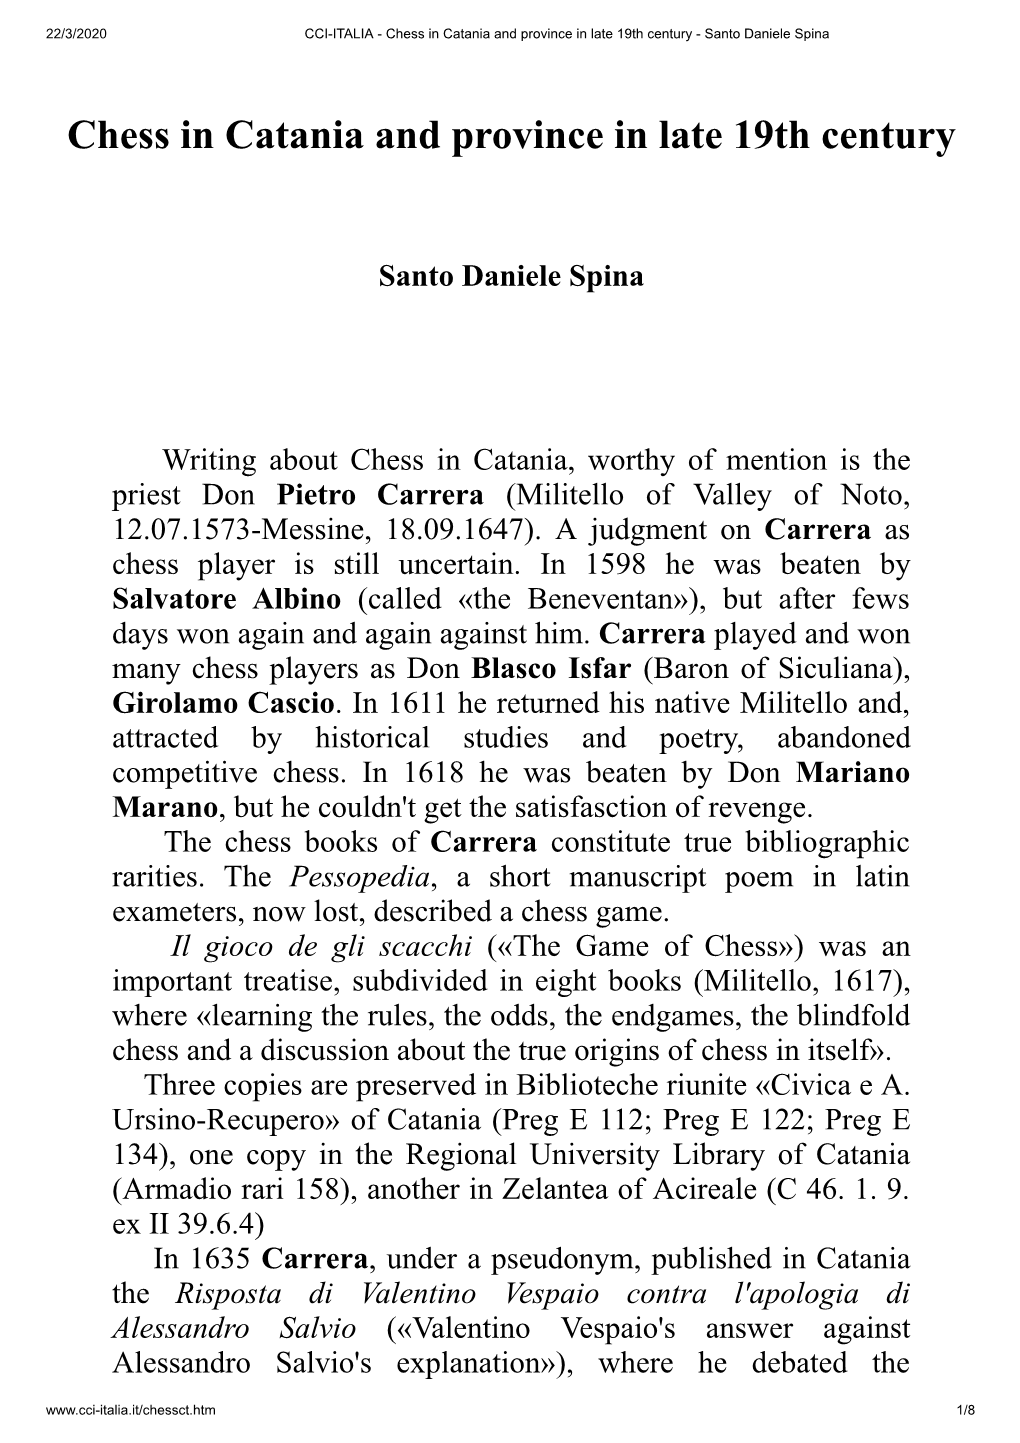 Chess in Catania and Province in Late 19Th Century - Santo Daniele Spina